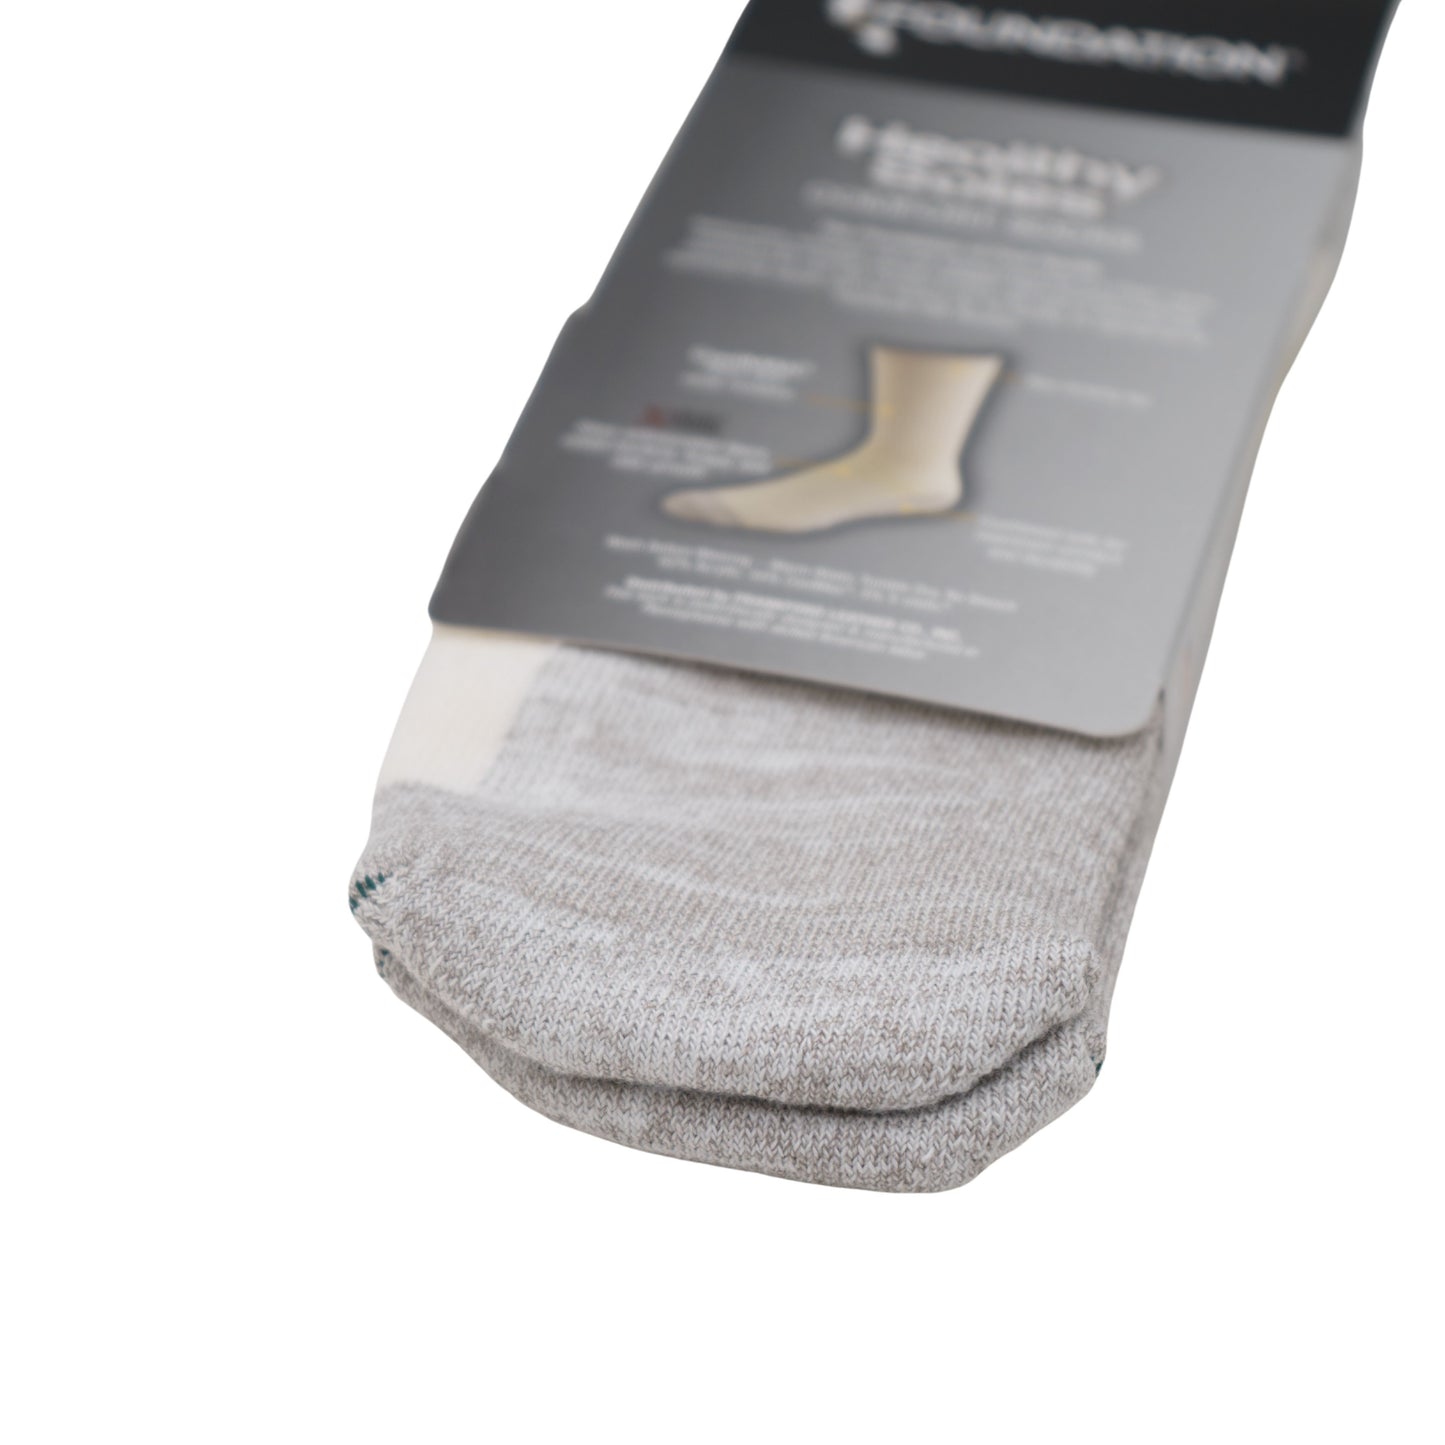 FOUNDATION® HEALTHY SOLE CIRCULATION ANKLE SOCKS - WHITE